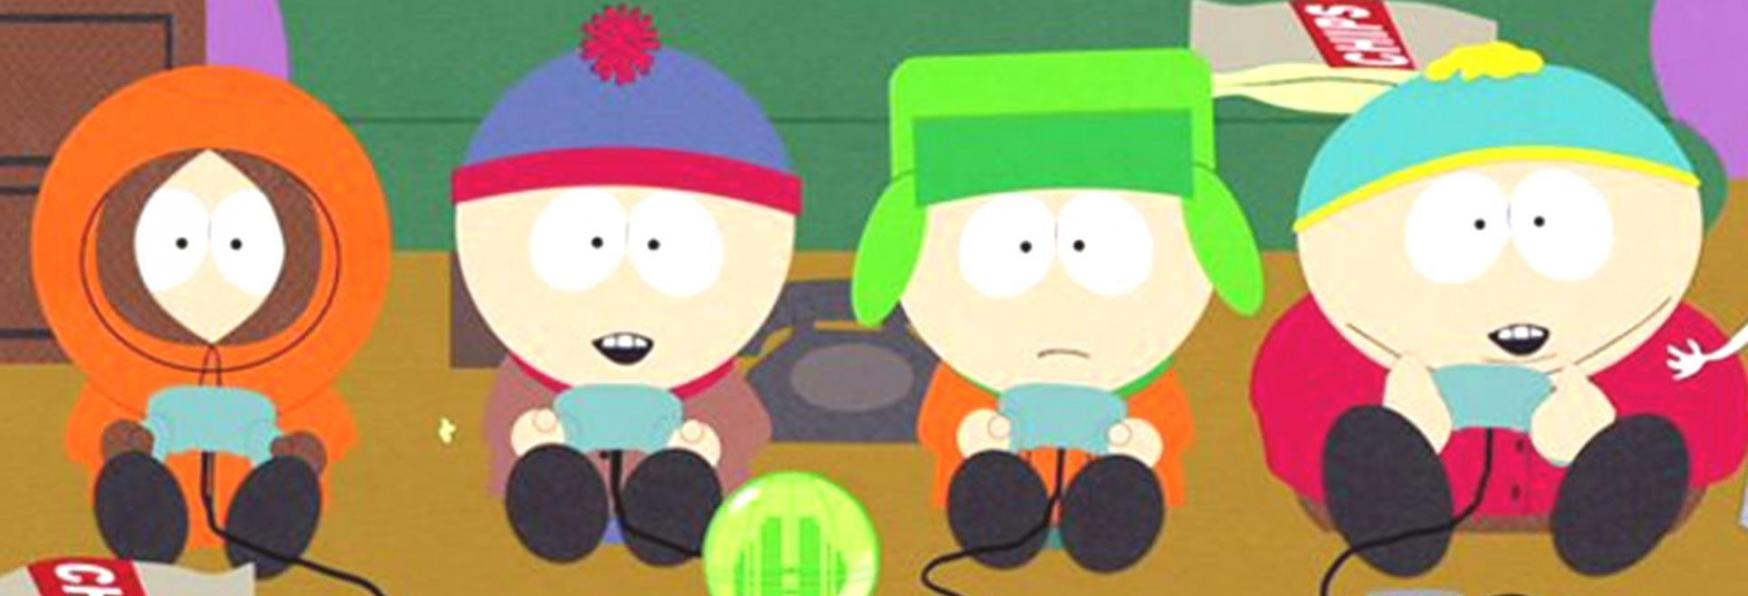 South Park 26: announced the release date of the new season